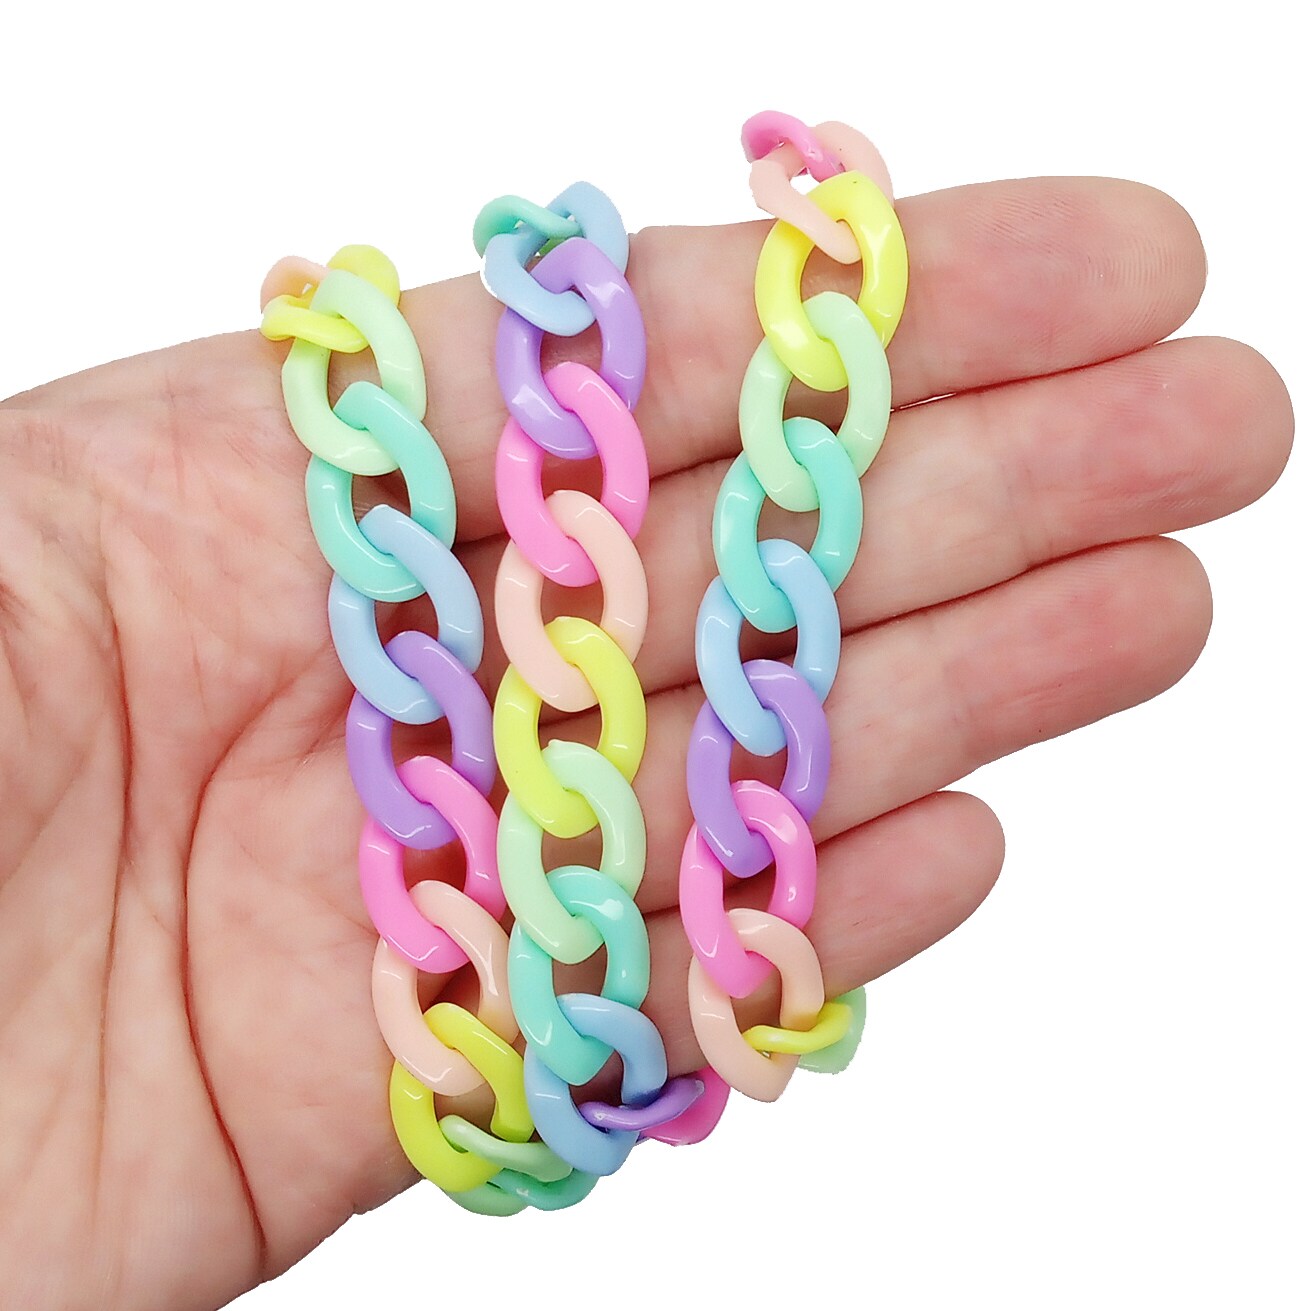 Rainbow Pastel Chain, Plastic Chain with Open Links, 36 inches, Adorabilities